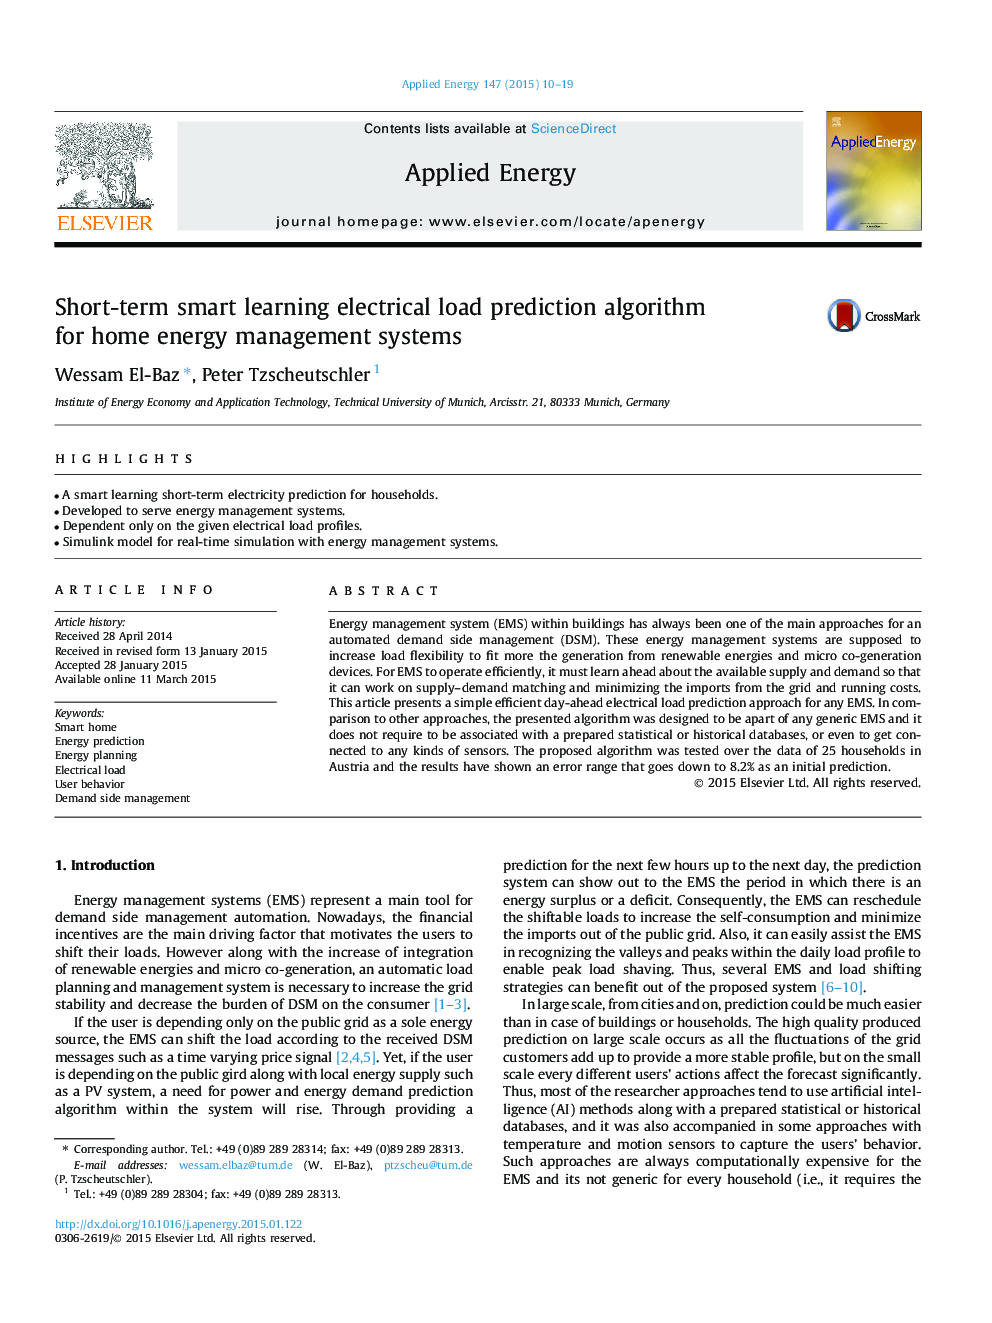 Short-term smart learning electrical load prediction algorithm for home energy management systems